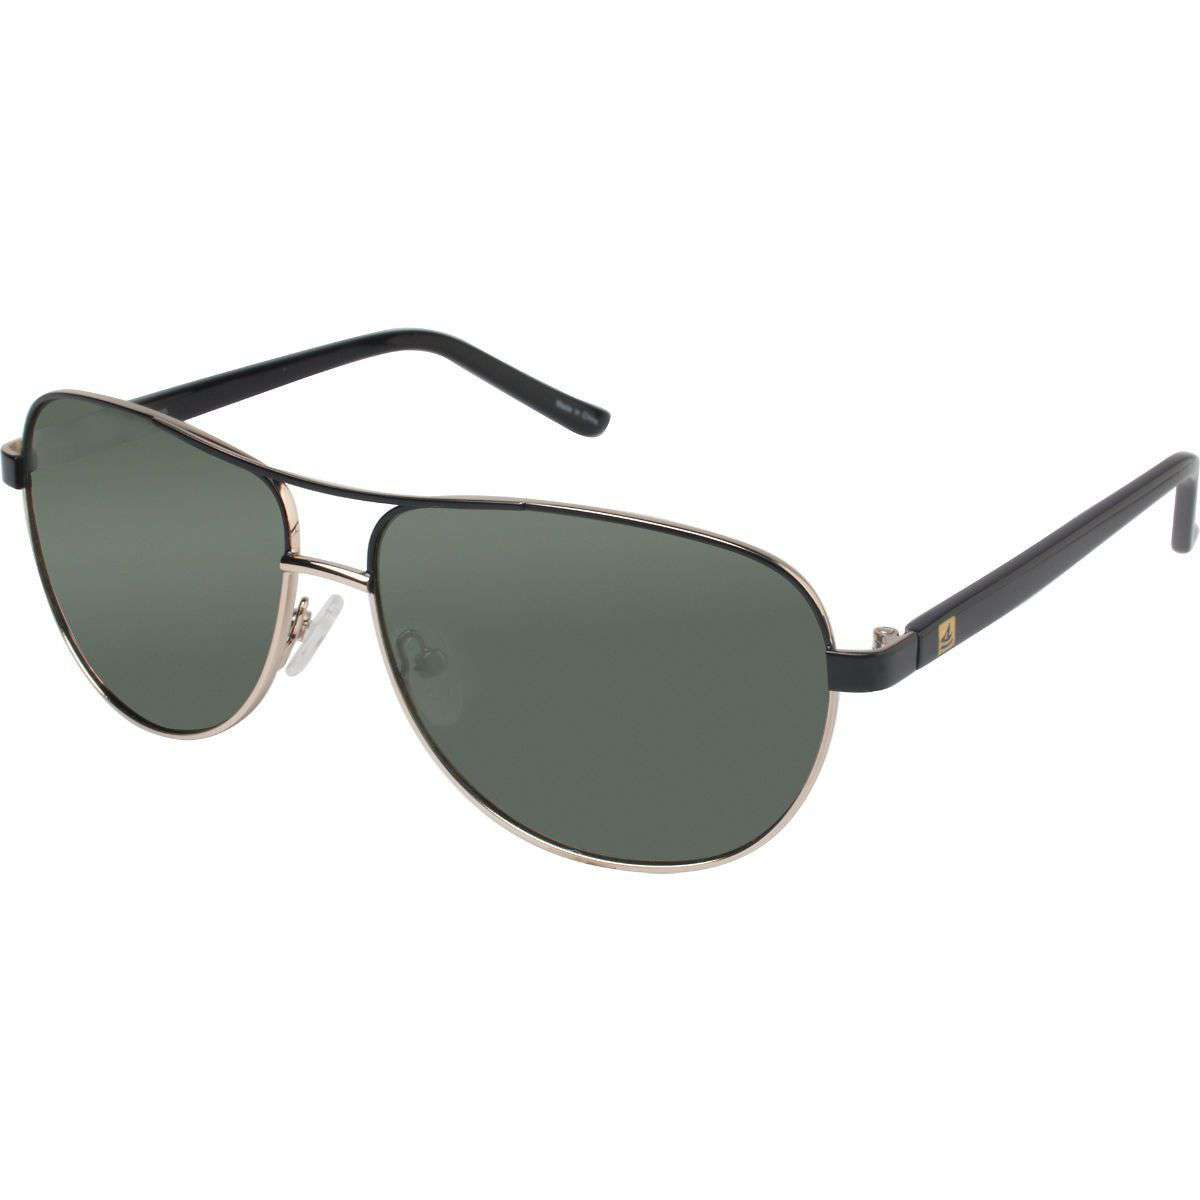 Bayside Polarized Sunglasses in Gunmetal and Navy by Sperry - Country Club Prep